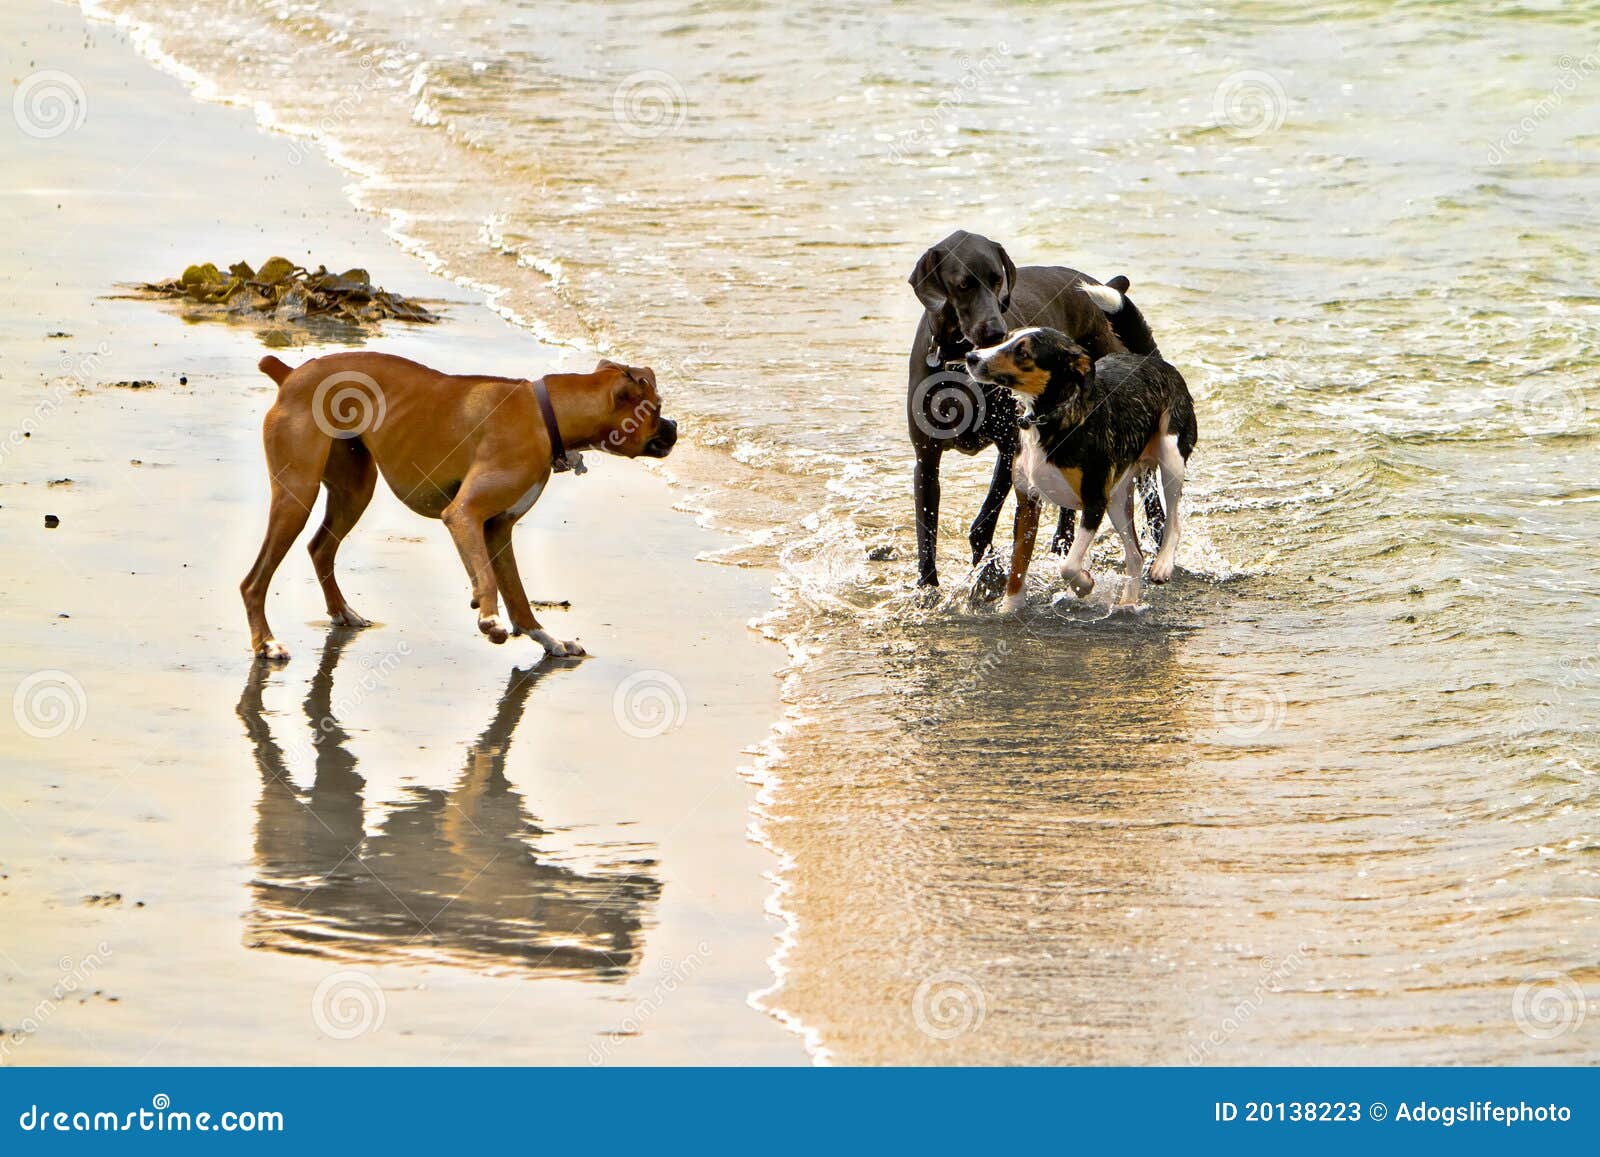 Three Dogs Meeting on the Beach Stock Image - Image of gathering, friendly:  20138223